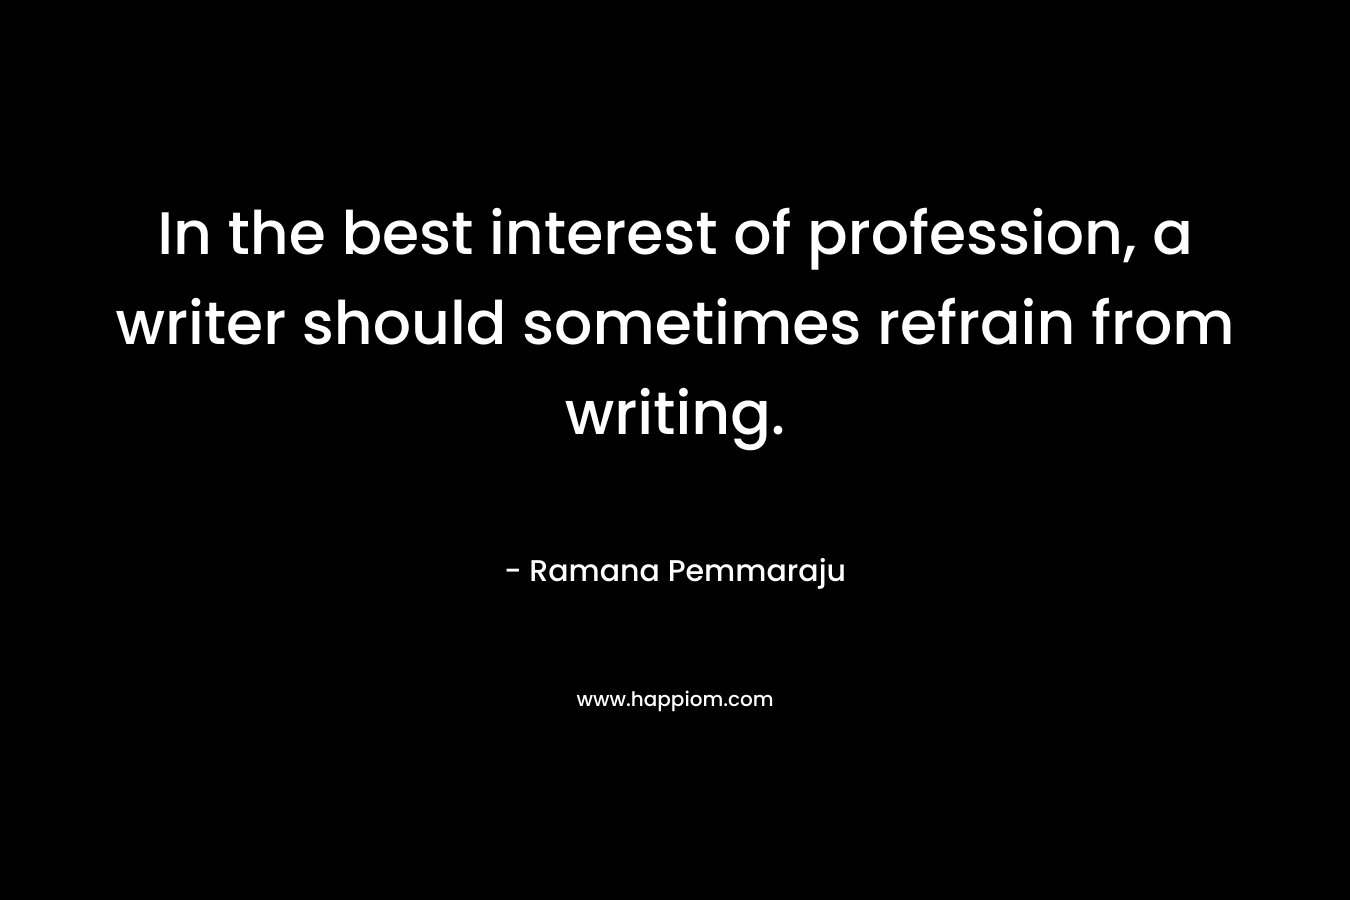 In the best interest of profession, a writer should sometimes refrain from writing. – Ramana Pemmaraju